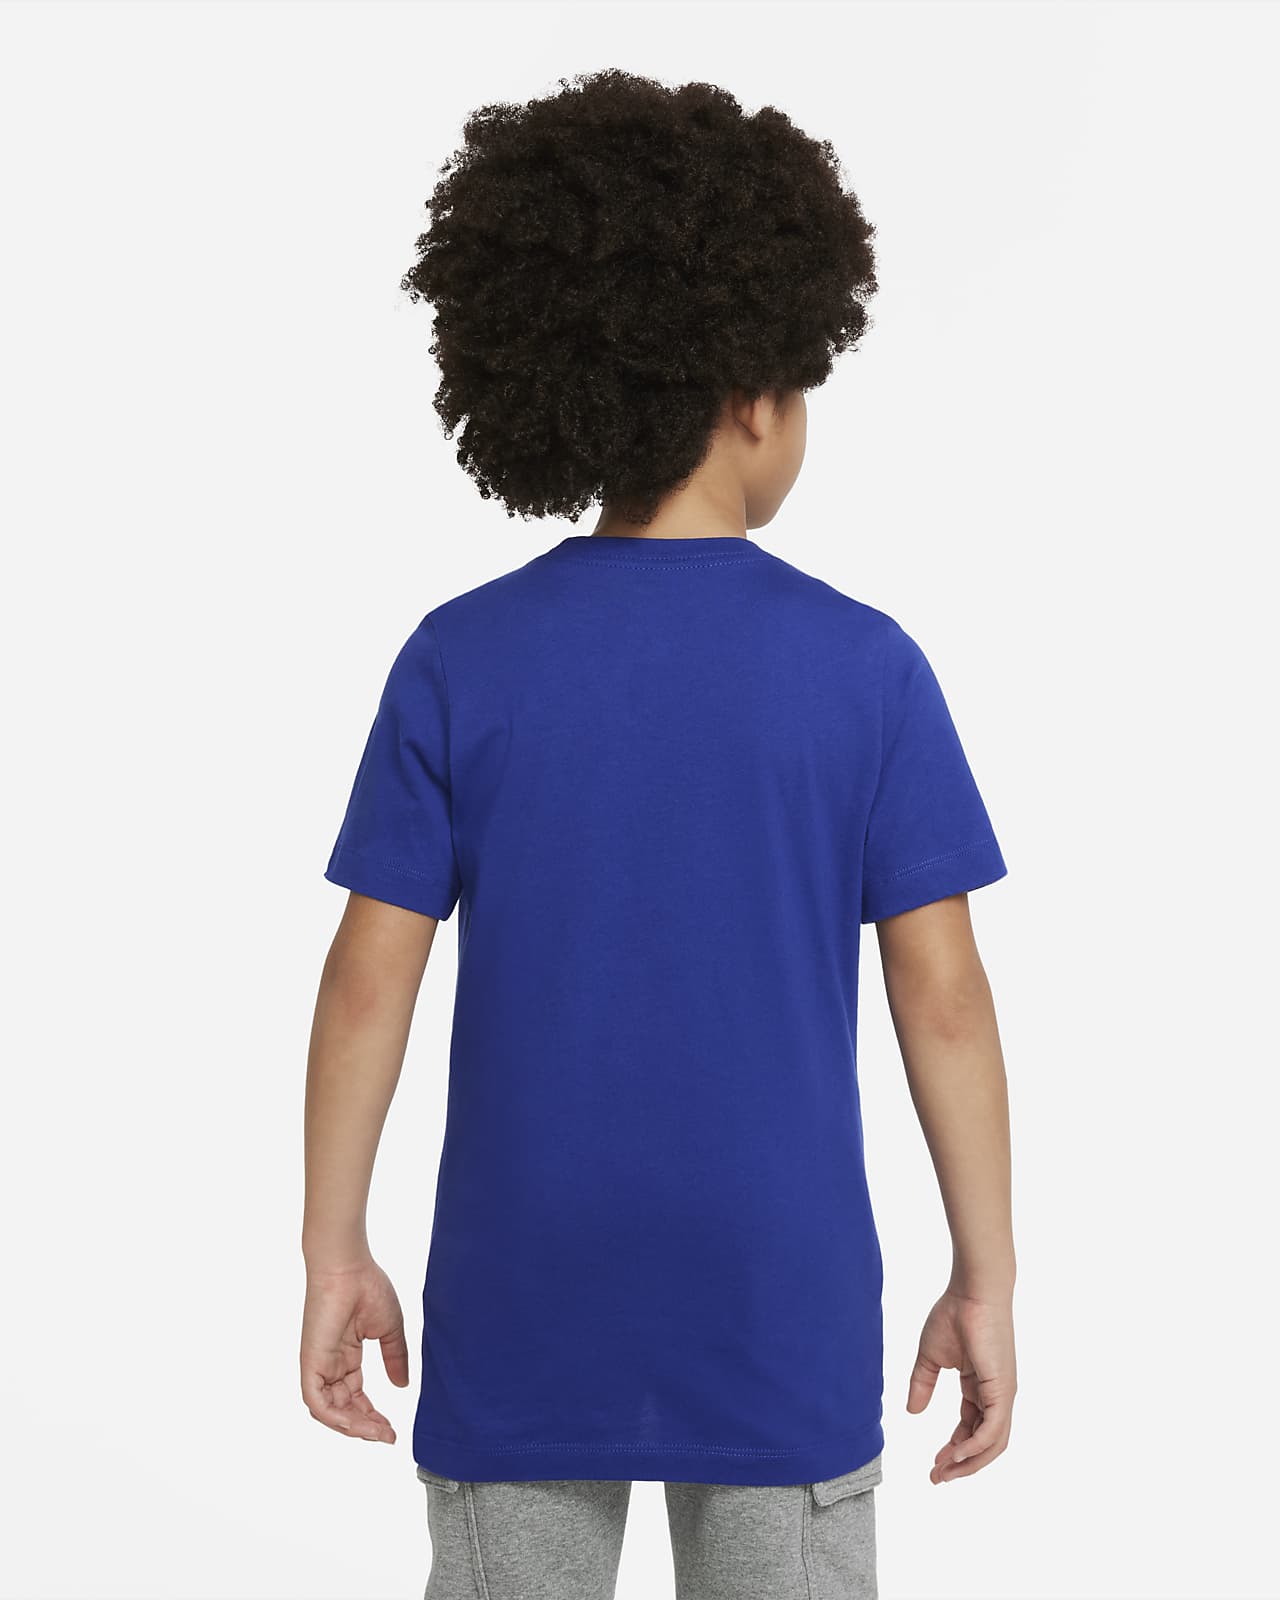 Chelsea FC Official Football Gift Kids Graphic T-Shirt 